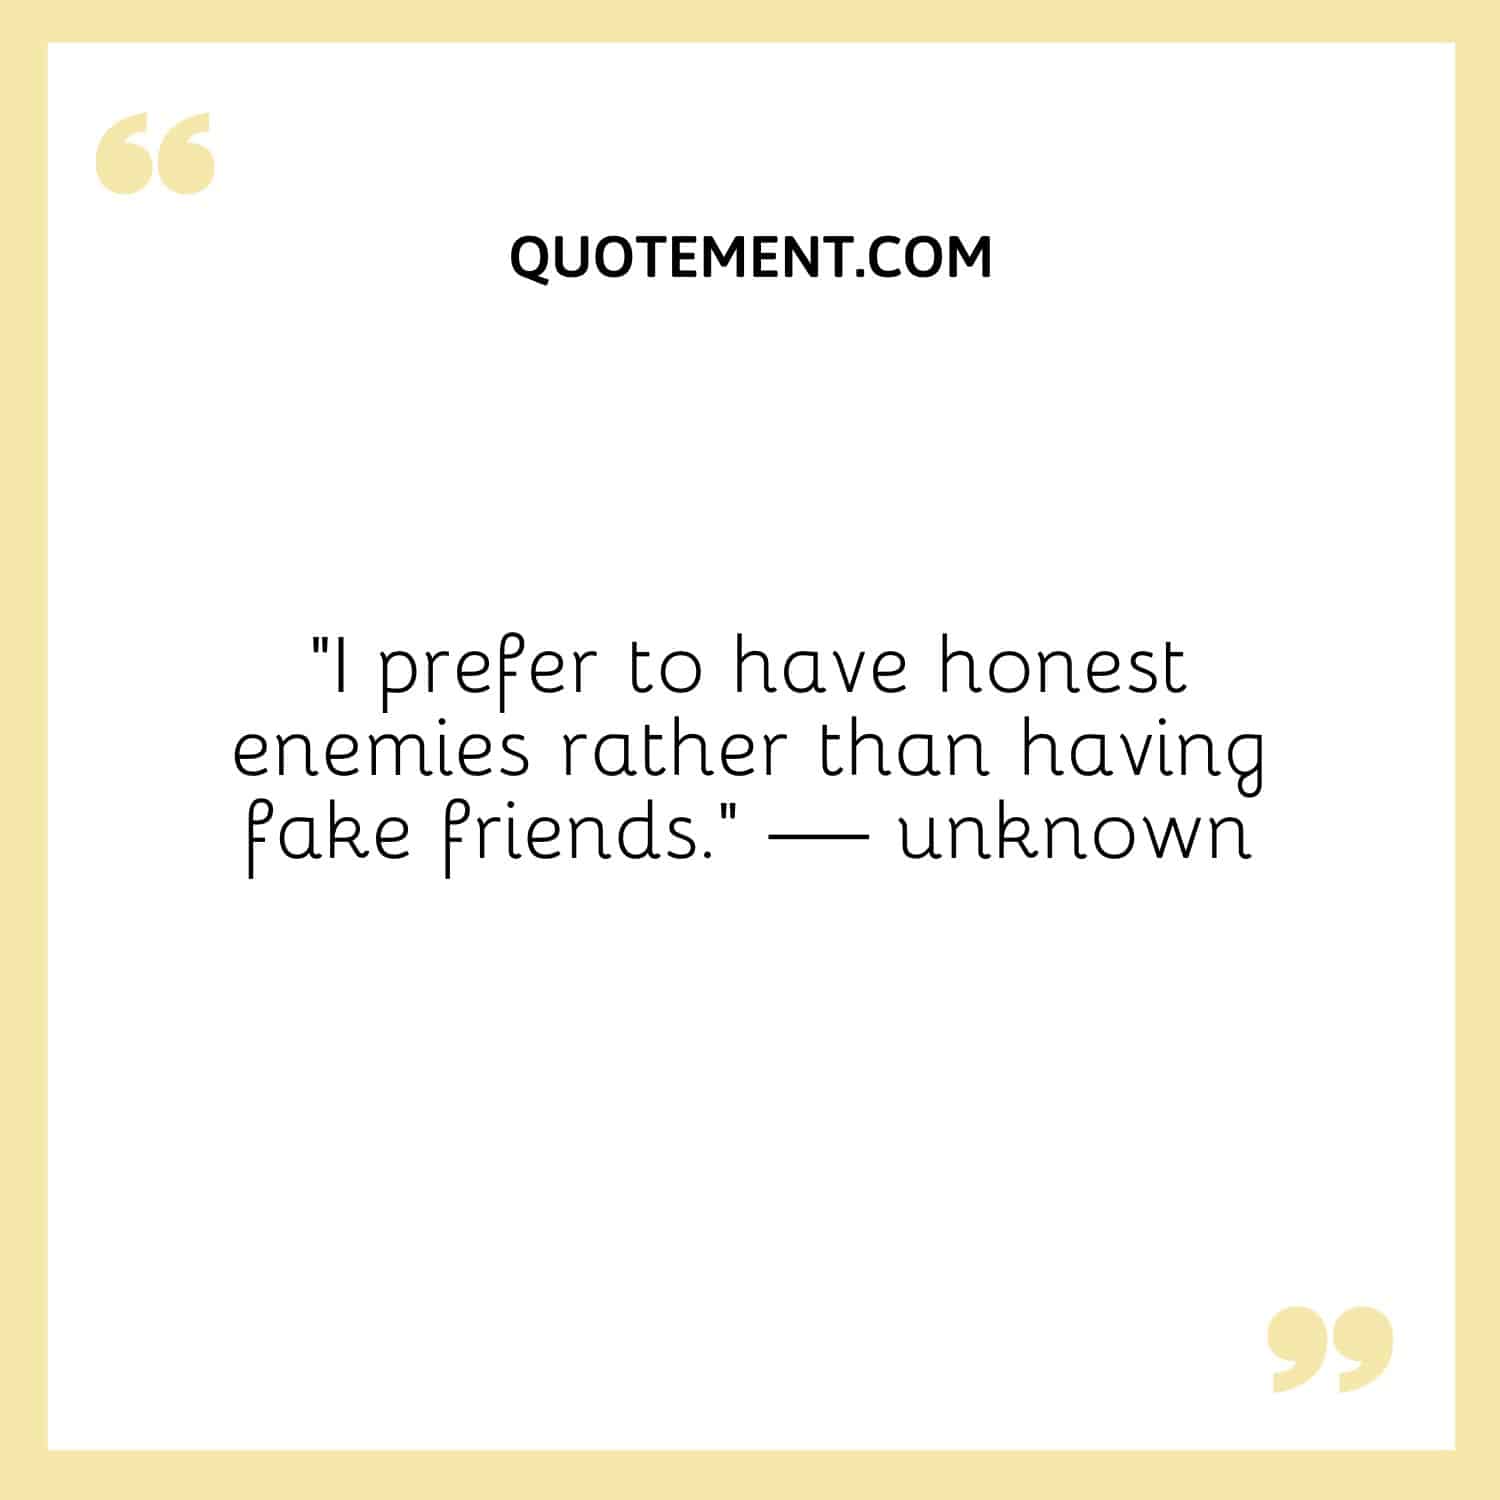 I prefer to have honest enemies rather than having fake friends